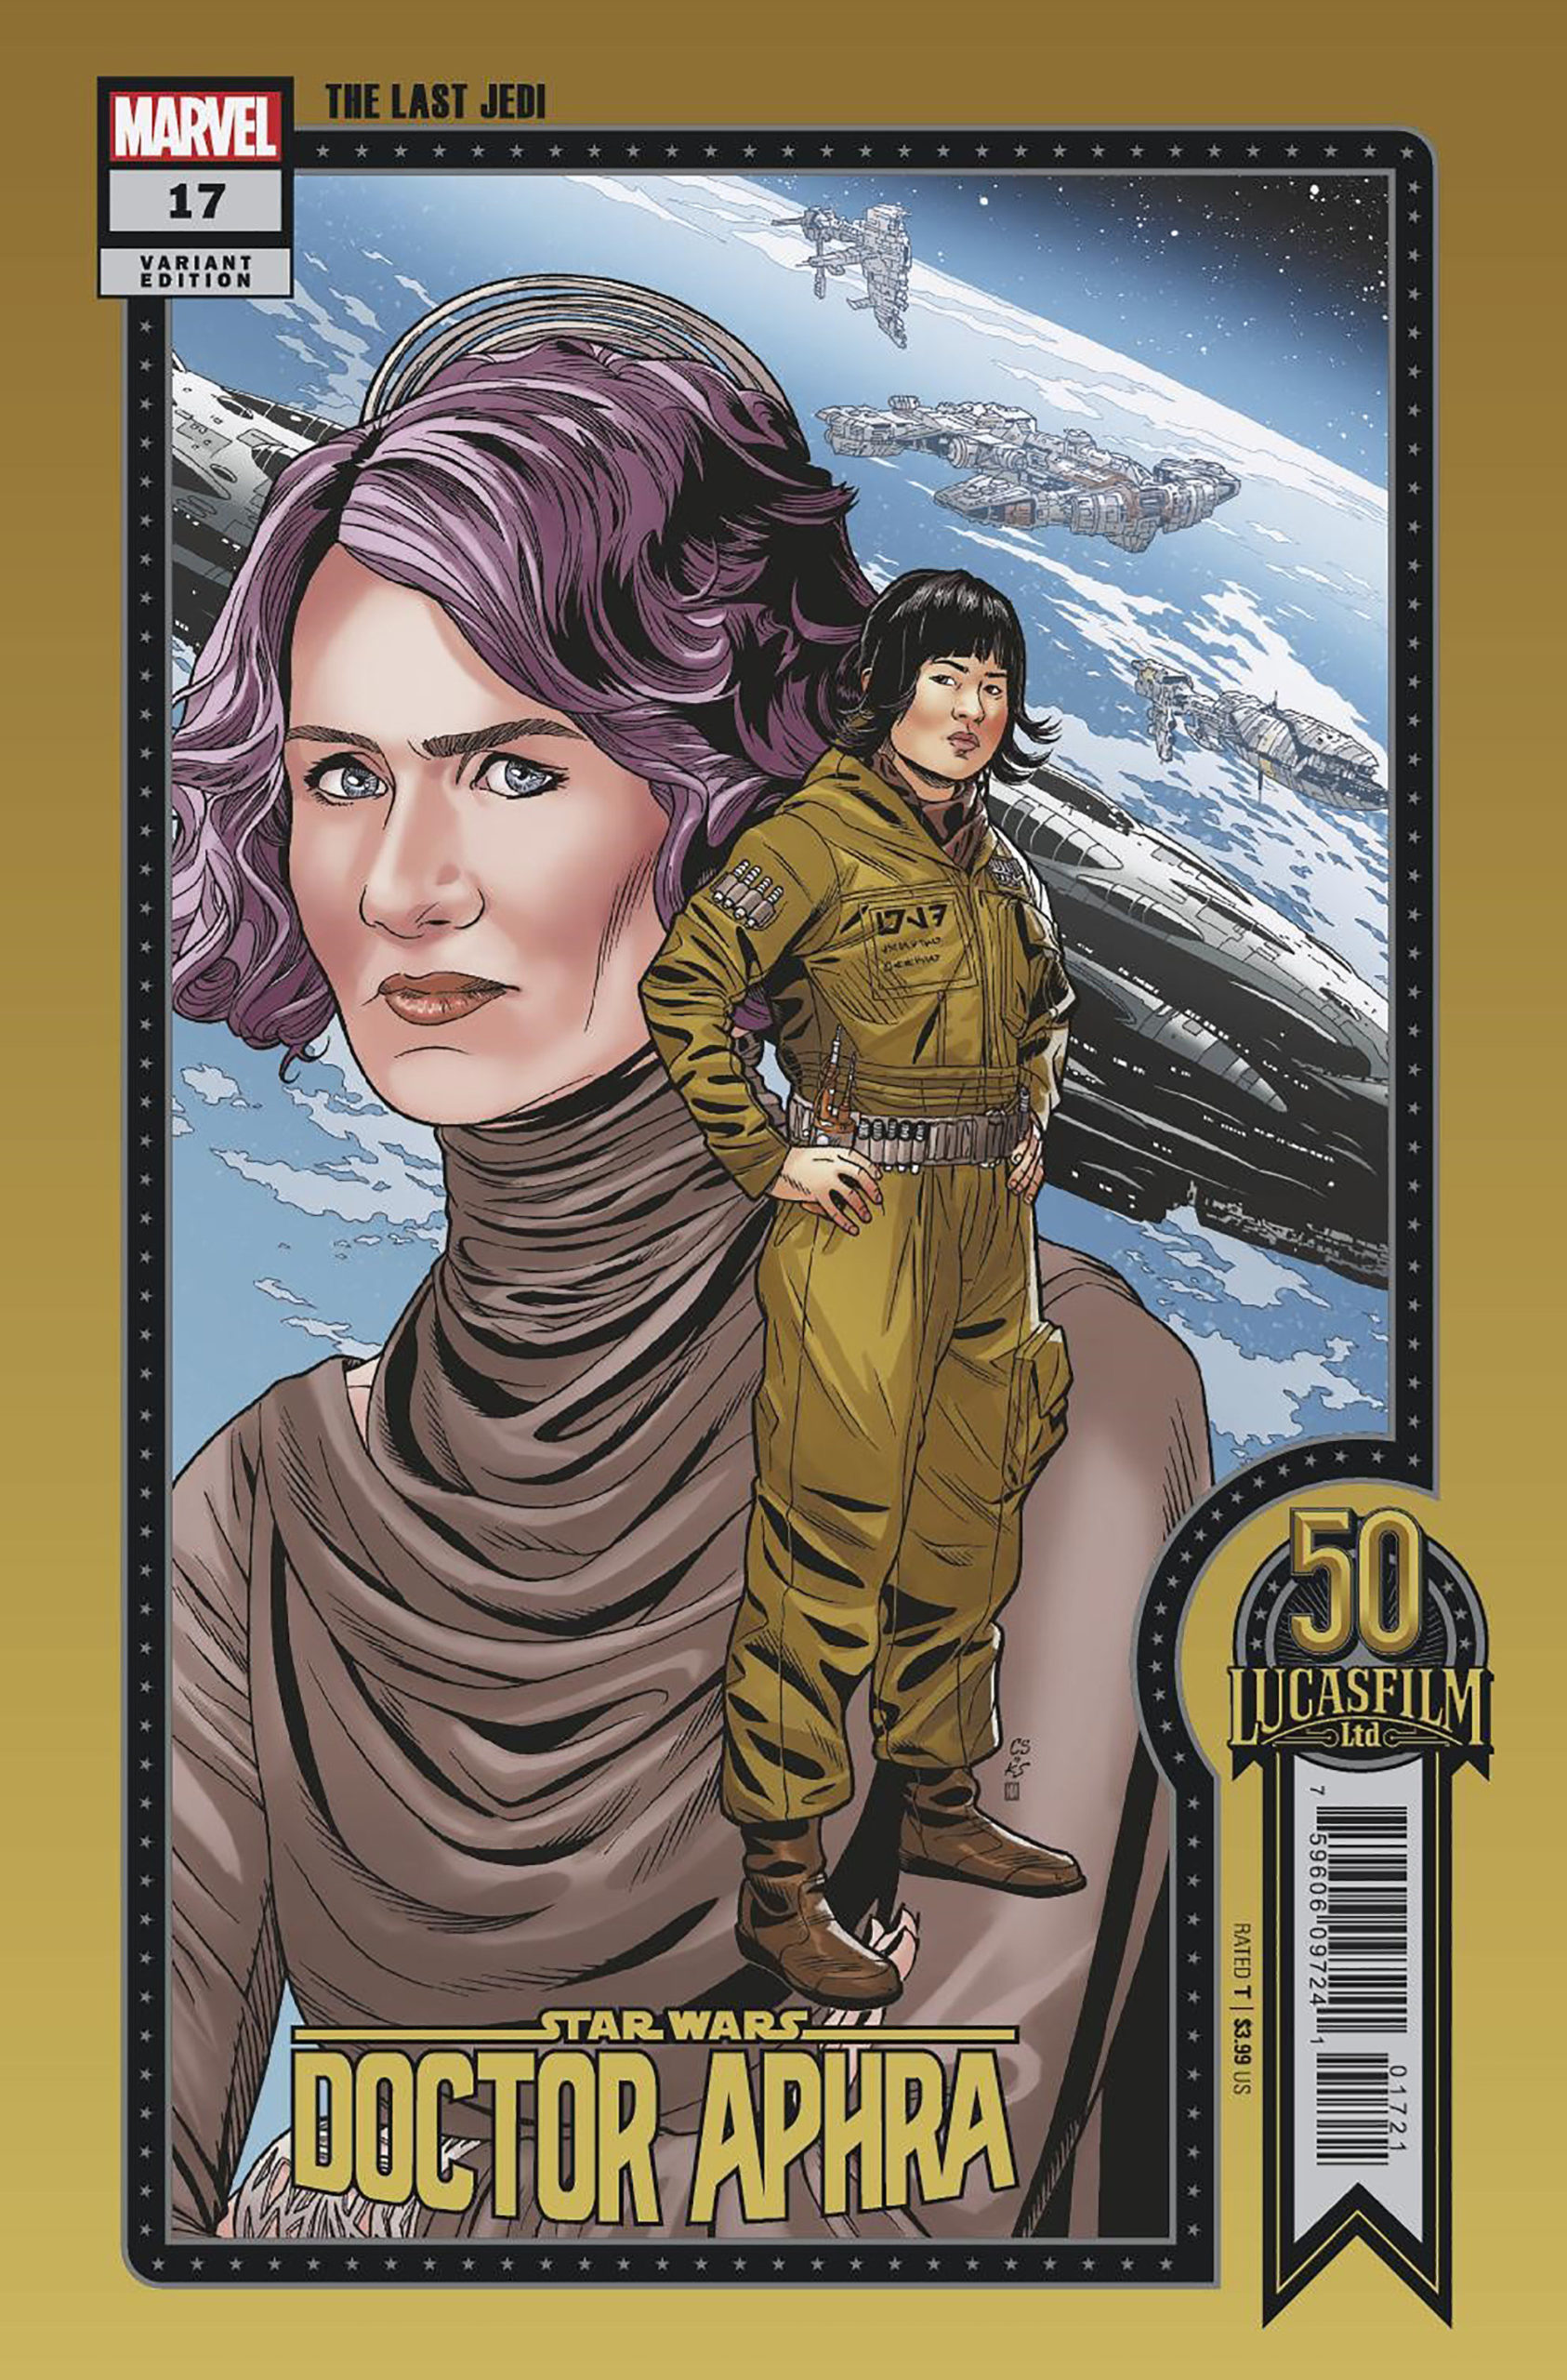 Doctor Aphra #17 (Chris Sprouse "The Last Jedi" Lucasfilm 50th Anniversary Variant Cover) (05.01.2022)